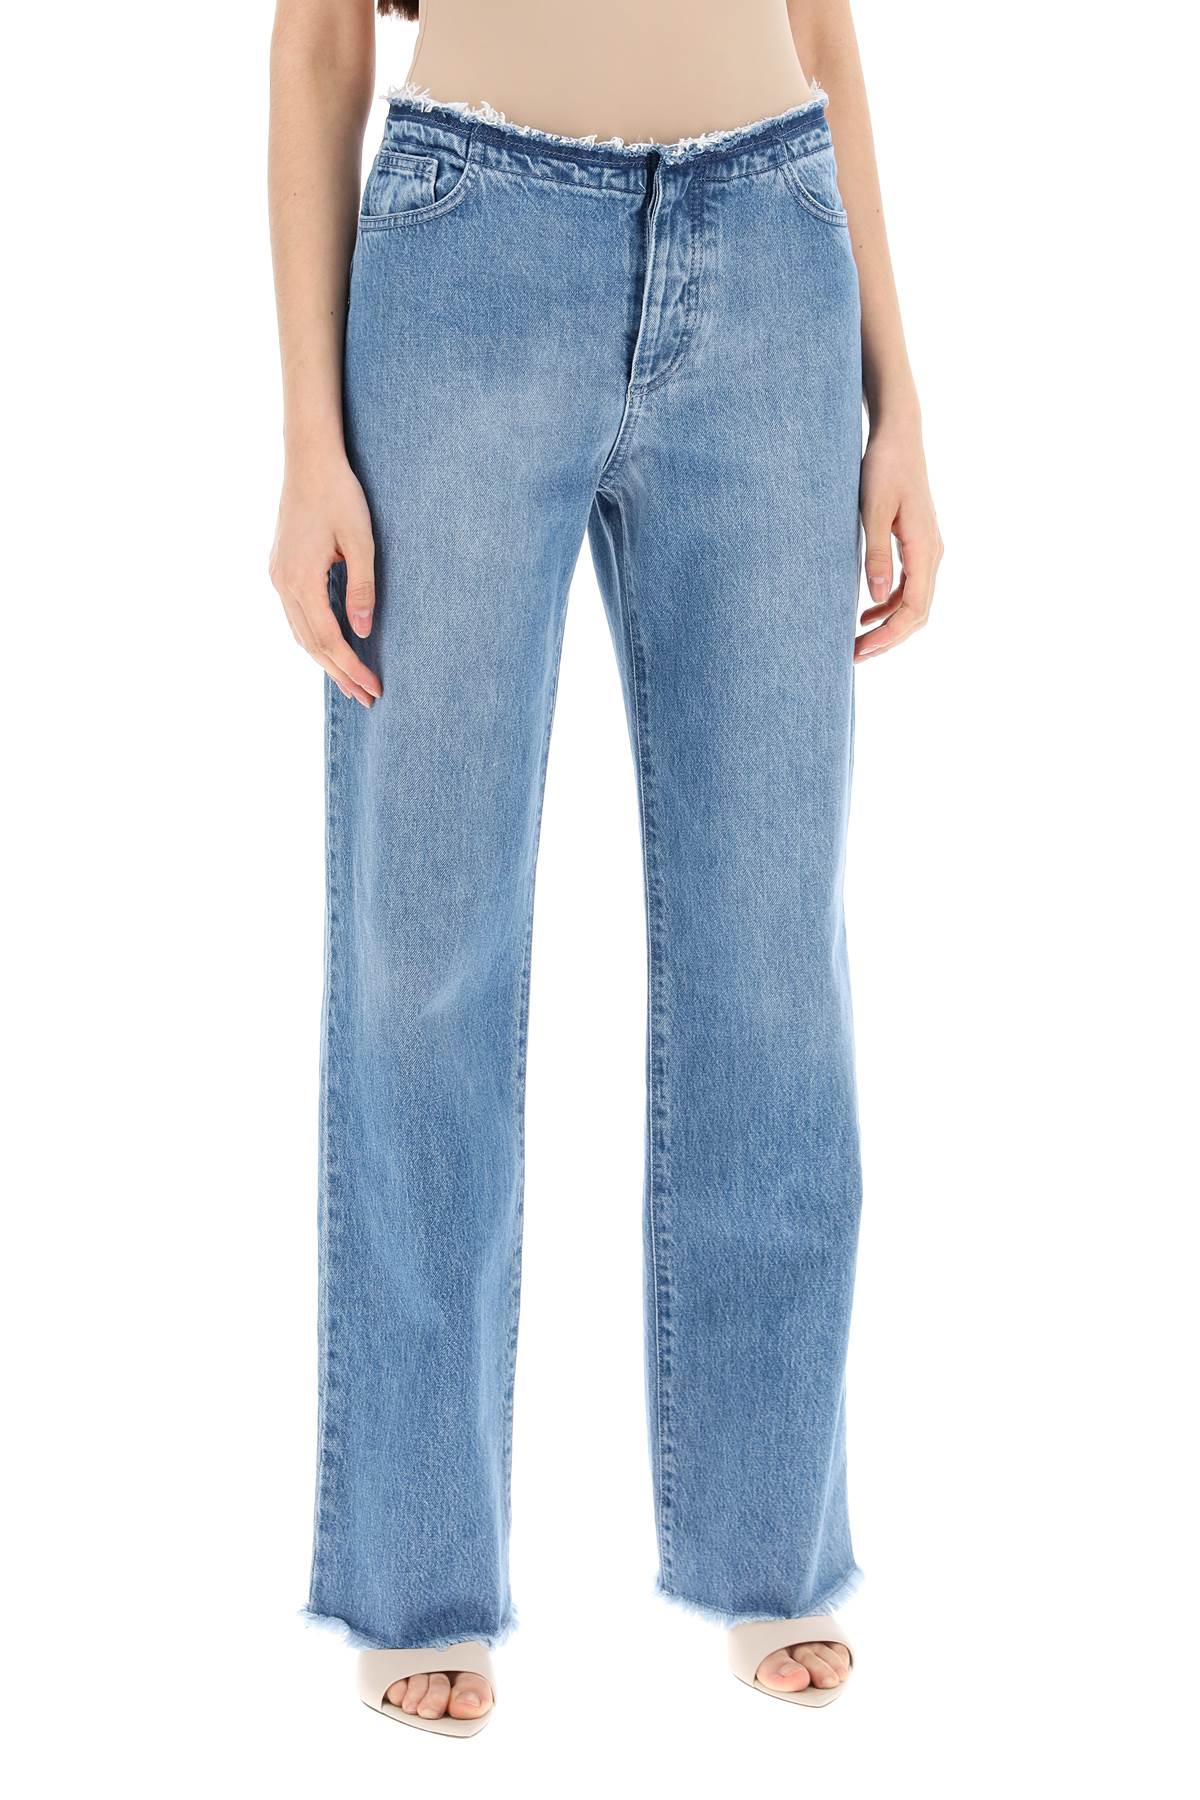 Mvp wardrobe straight leg levant jeans with a-1